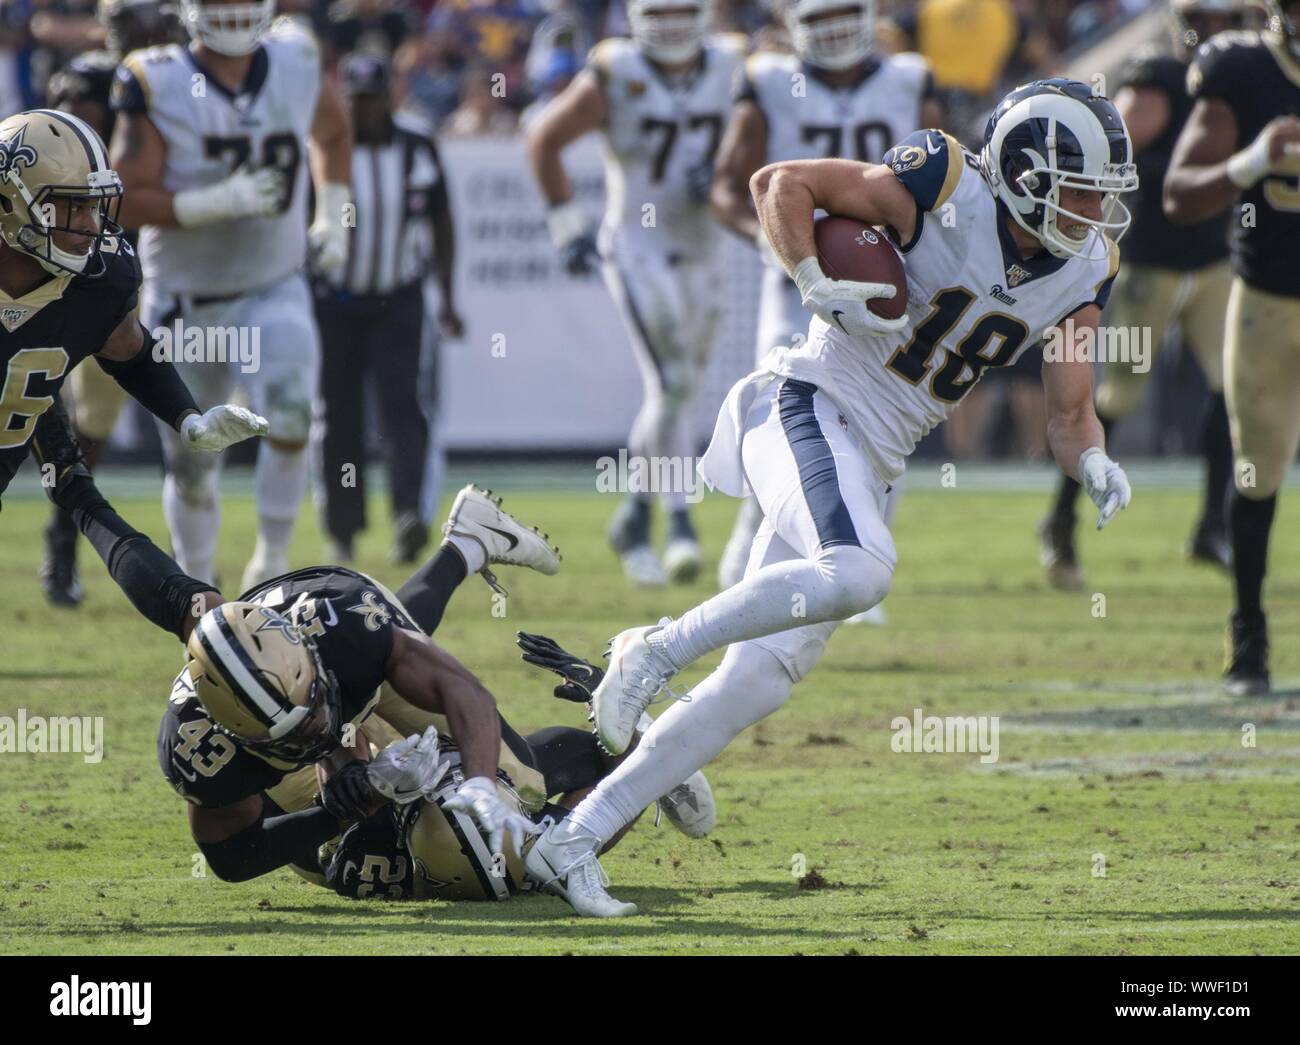 Los Angeles, United States. 15th Sep, 2019. Los Angeles Rams wide receiver Cooper Kupp (18) leaves New Orleans Saints defenders behind on his long second half reception at the Los Angeles Memorial Coliseum in Los Angeles, California on Sunday, September 15, 2019. The Rams defeated the Saints 27 - 9 to open their home season. Photo by Michael Goulding/UPI Credit: UPI/Alamy Live News Stock Photo